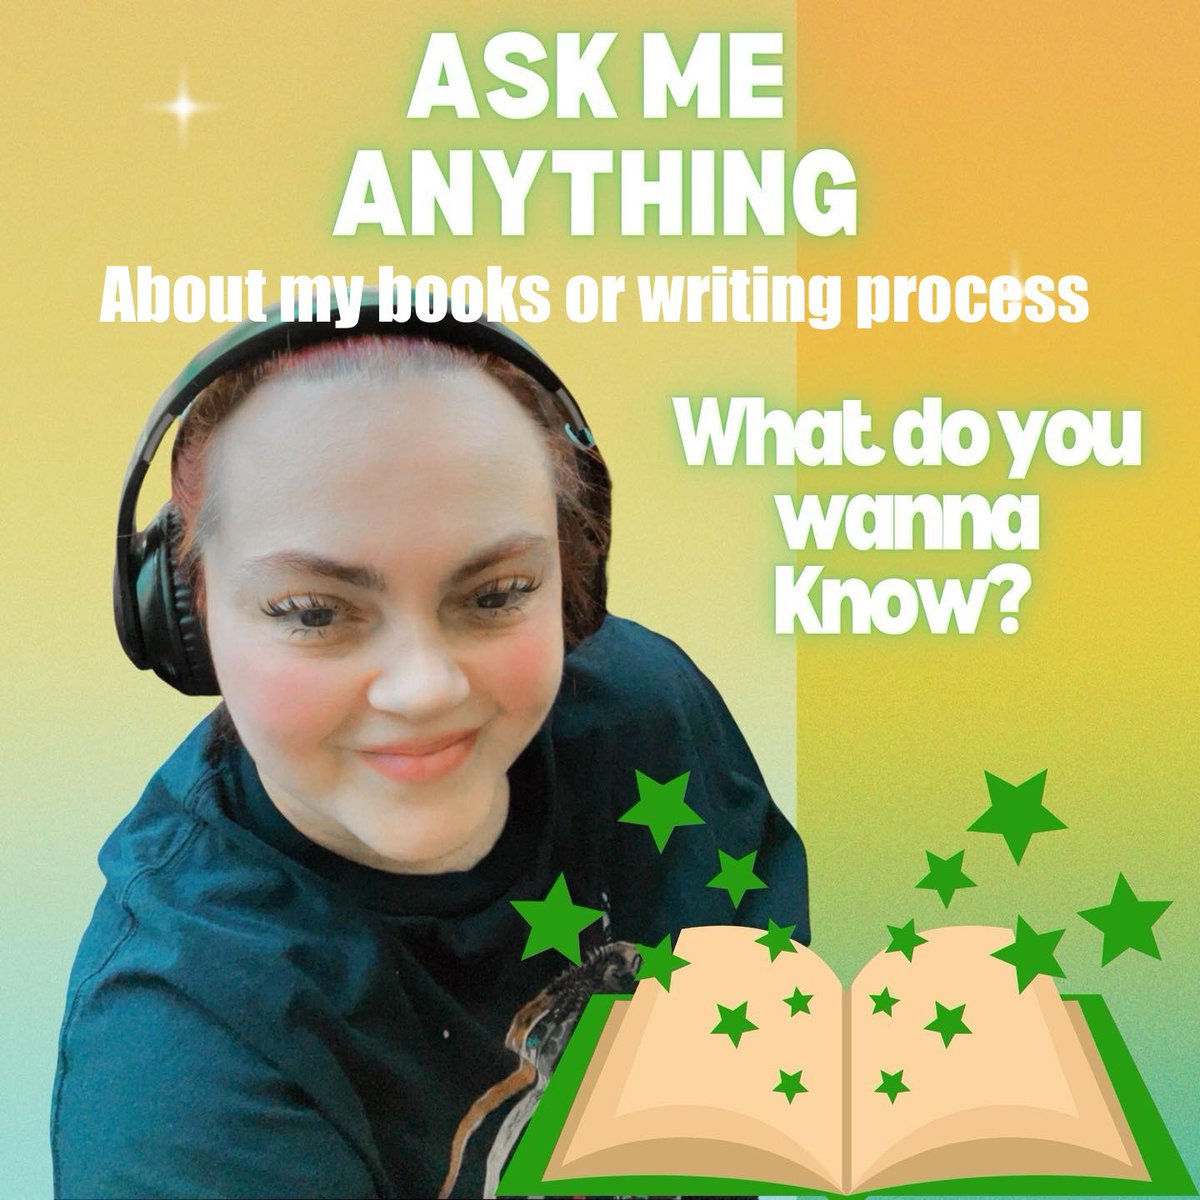 Ask me anything!
Have questions about my writing or editing process?
Have questions about what books I like to read?
Comment below and I’ll try to answer them.
#bookish #booktok #authortok #asktheauthor